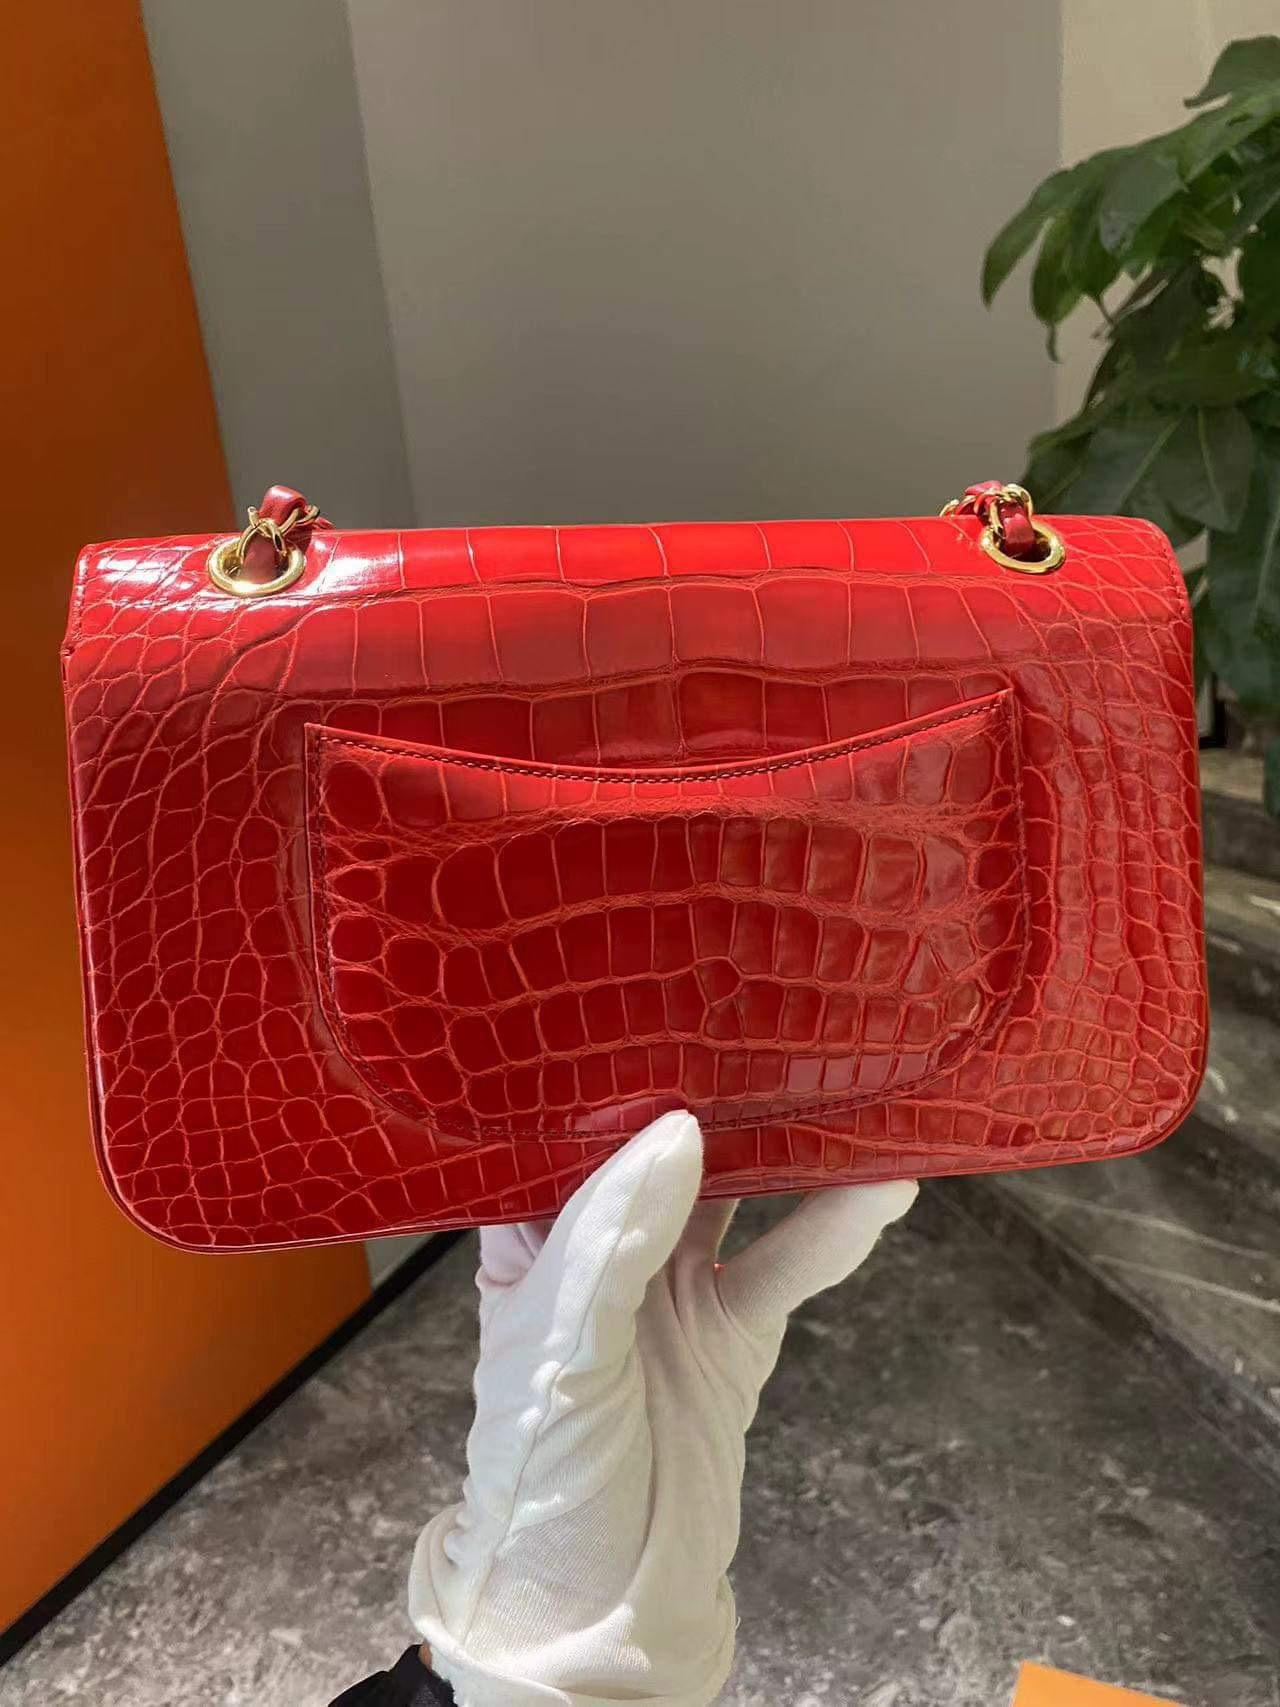 Chanel Medium Double Flap bag in shiny red alligator with gold hardware  For Sale 1